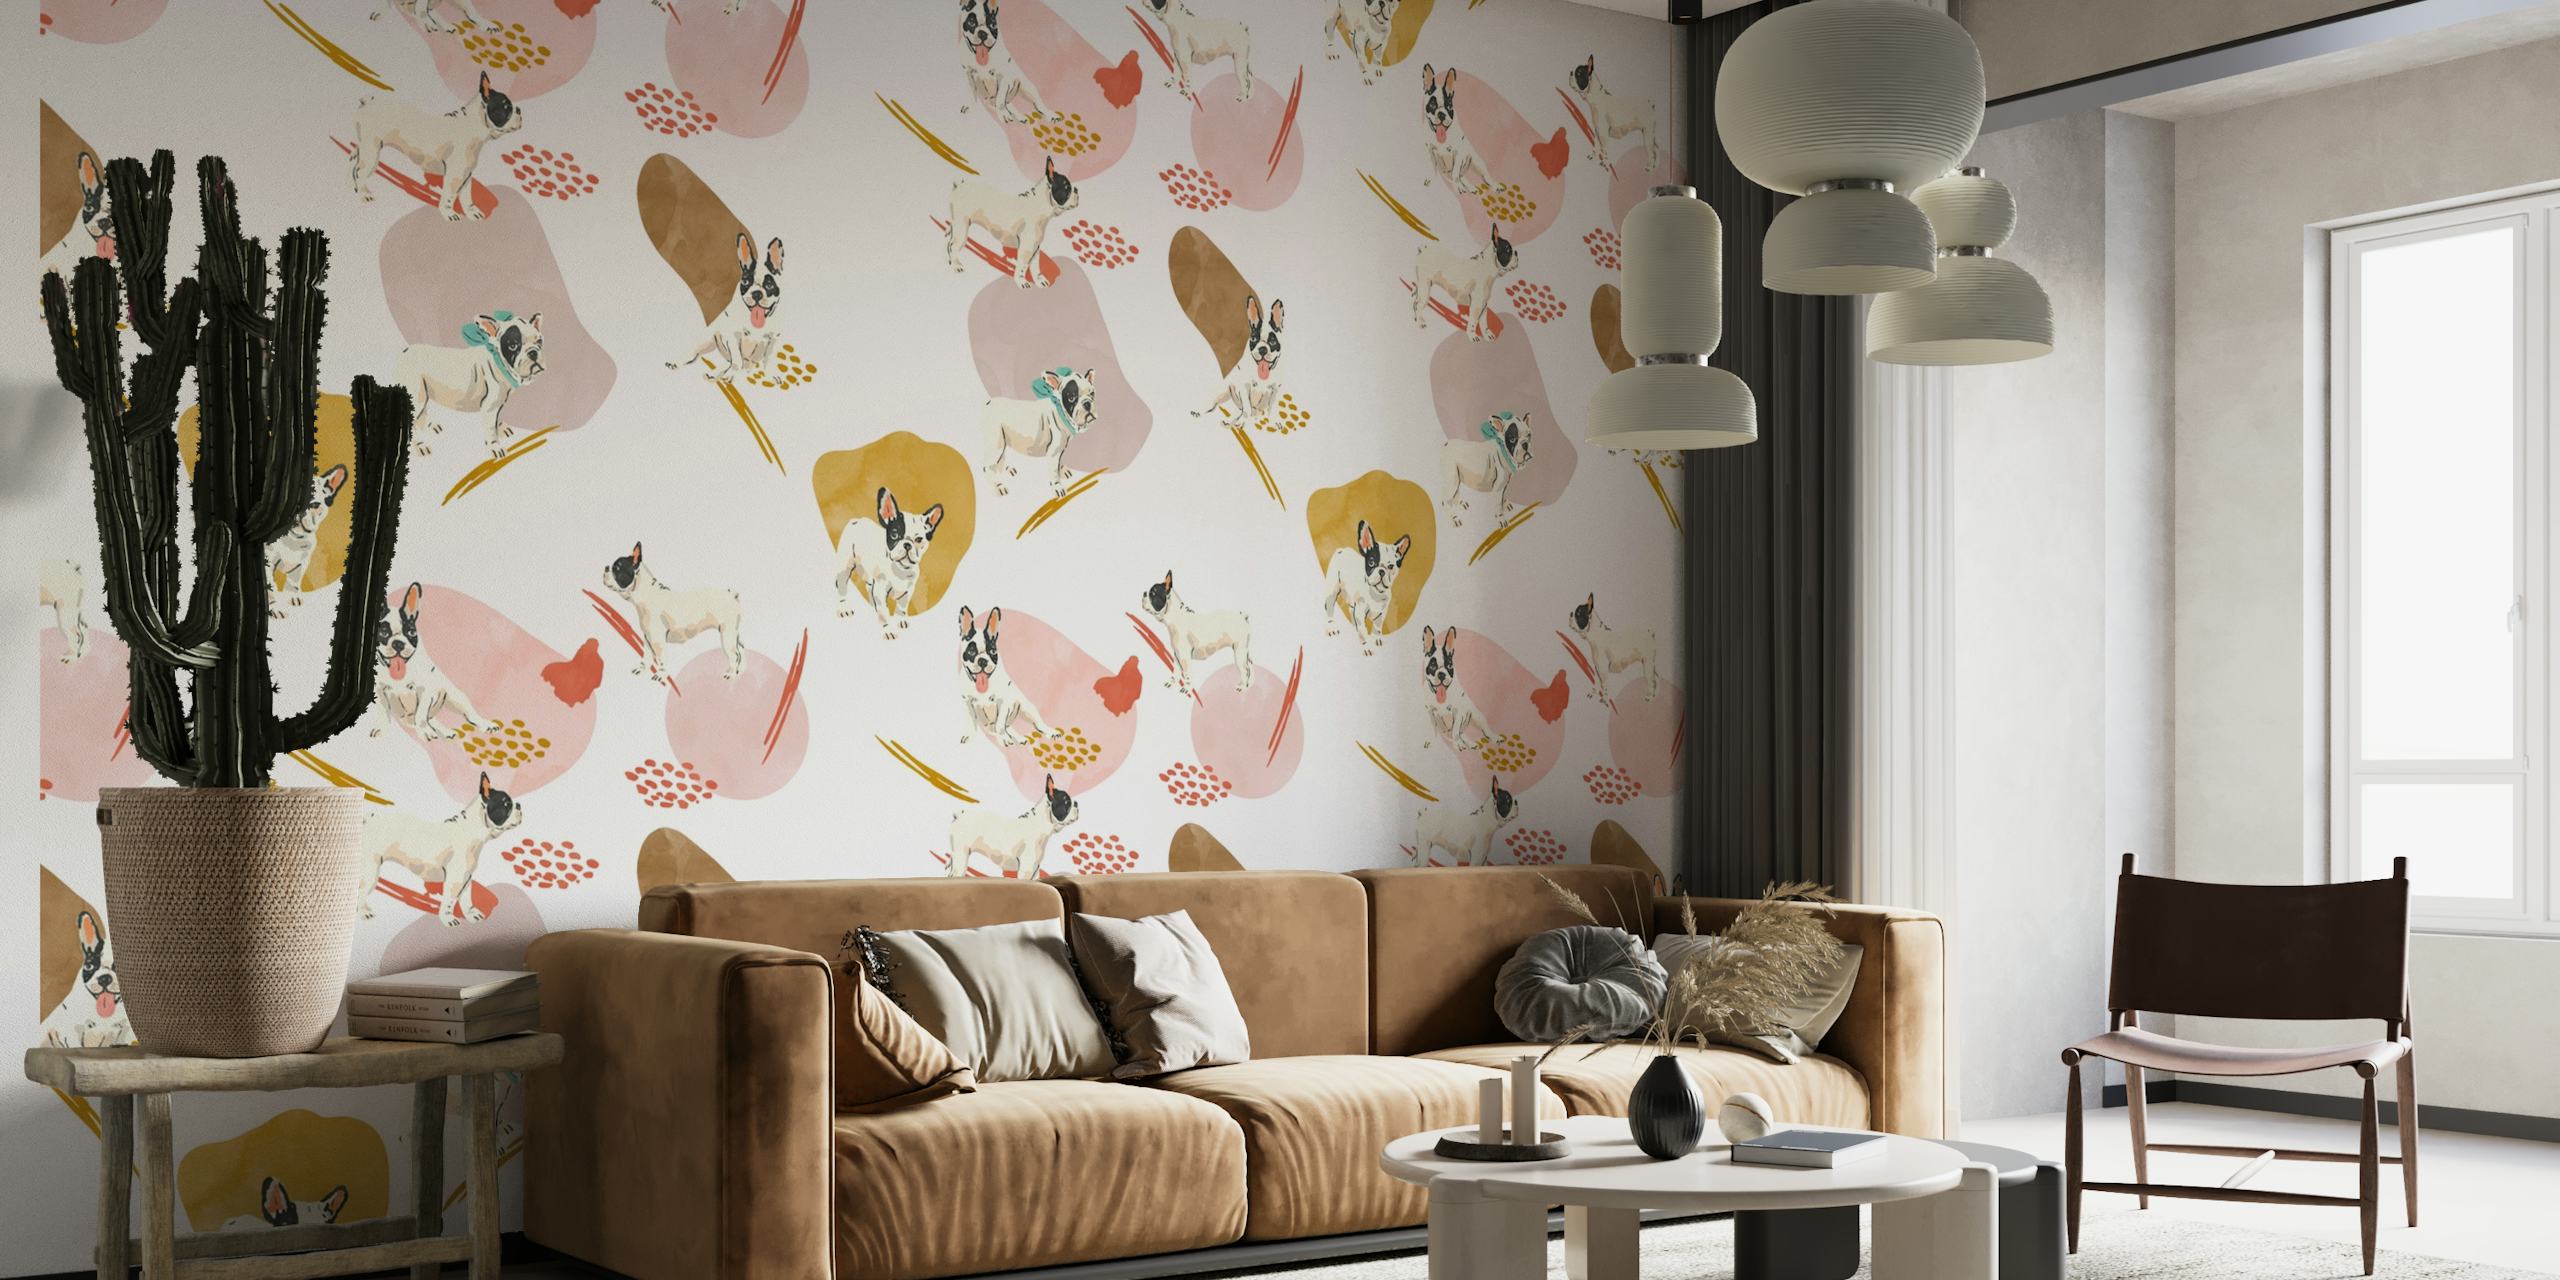 Cute French bulldogs in playful poses pattern on a wall mural